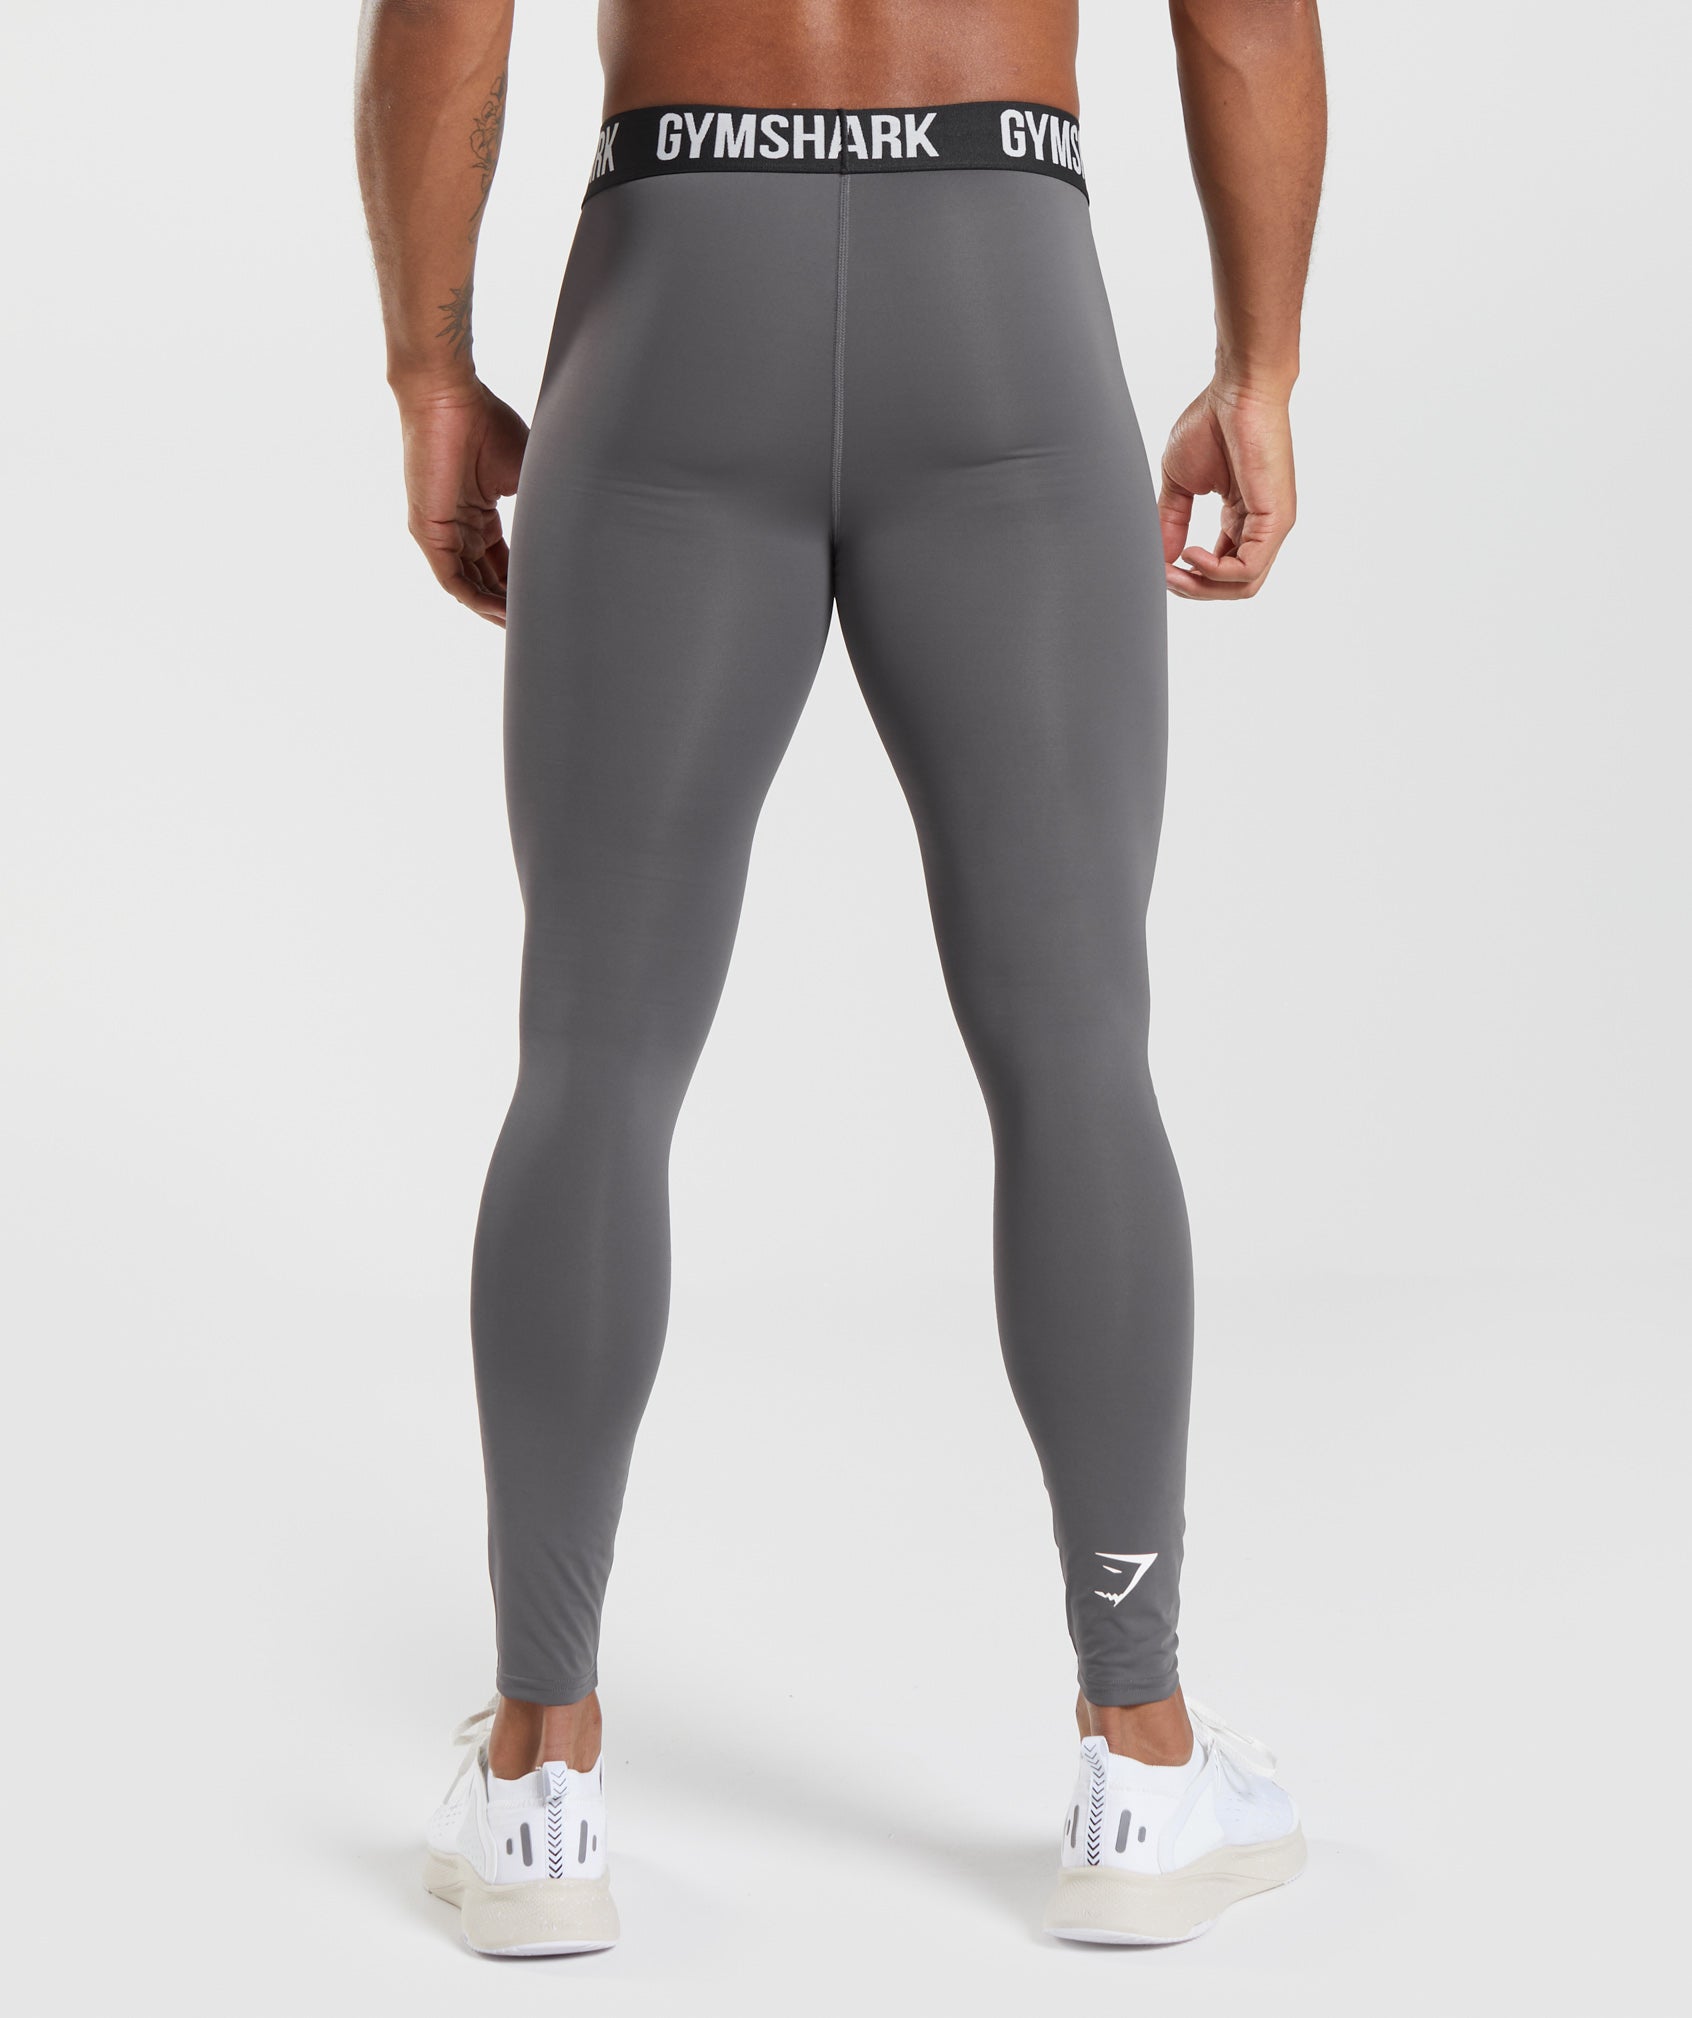 Mens Leggings (Updated for 2021) - The Ultimate Guide – Sundried